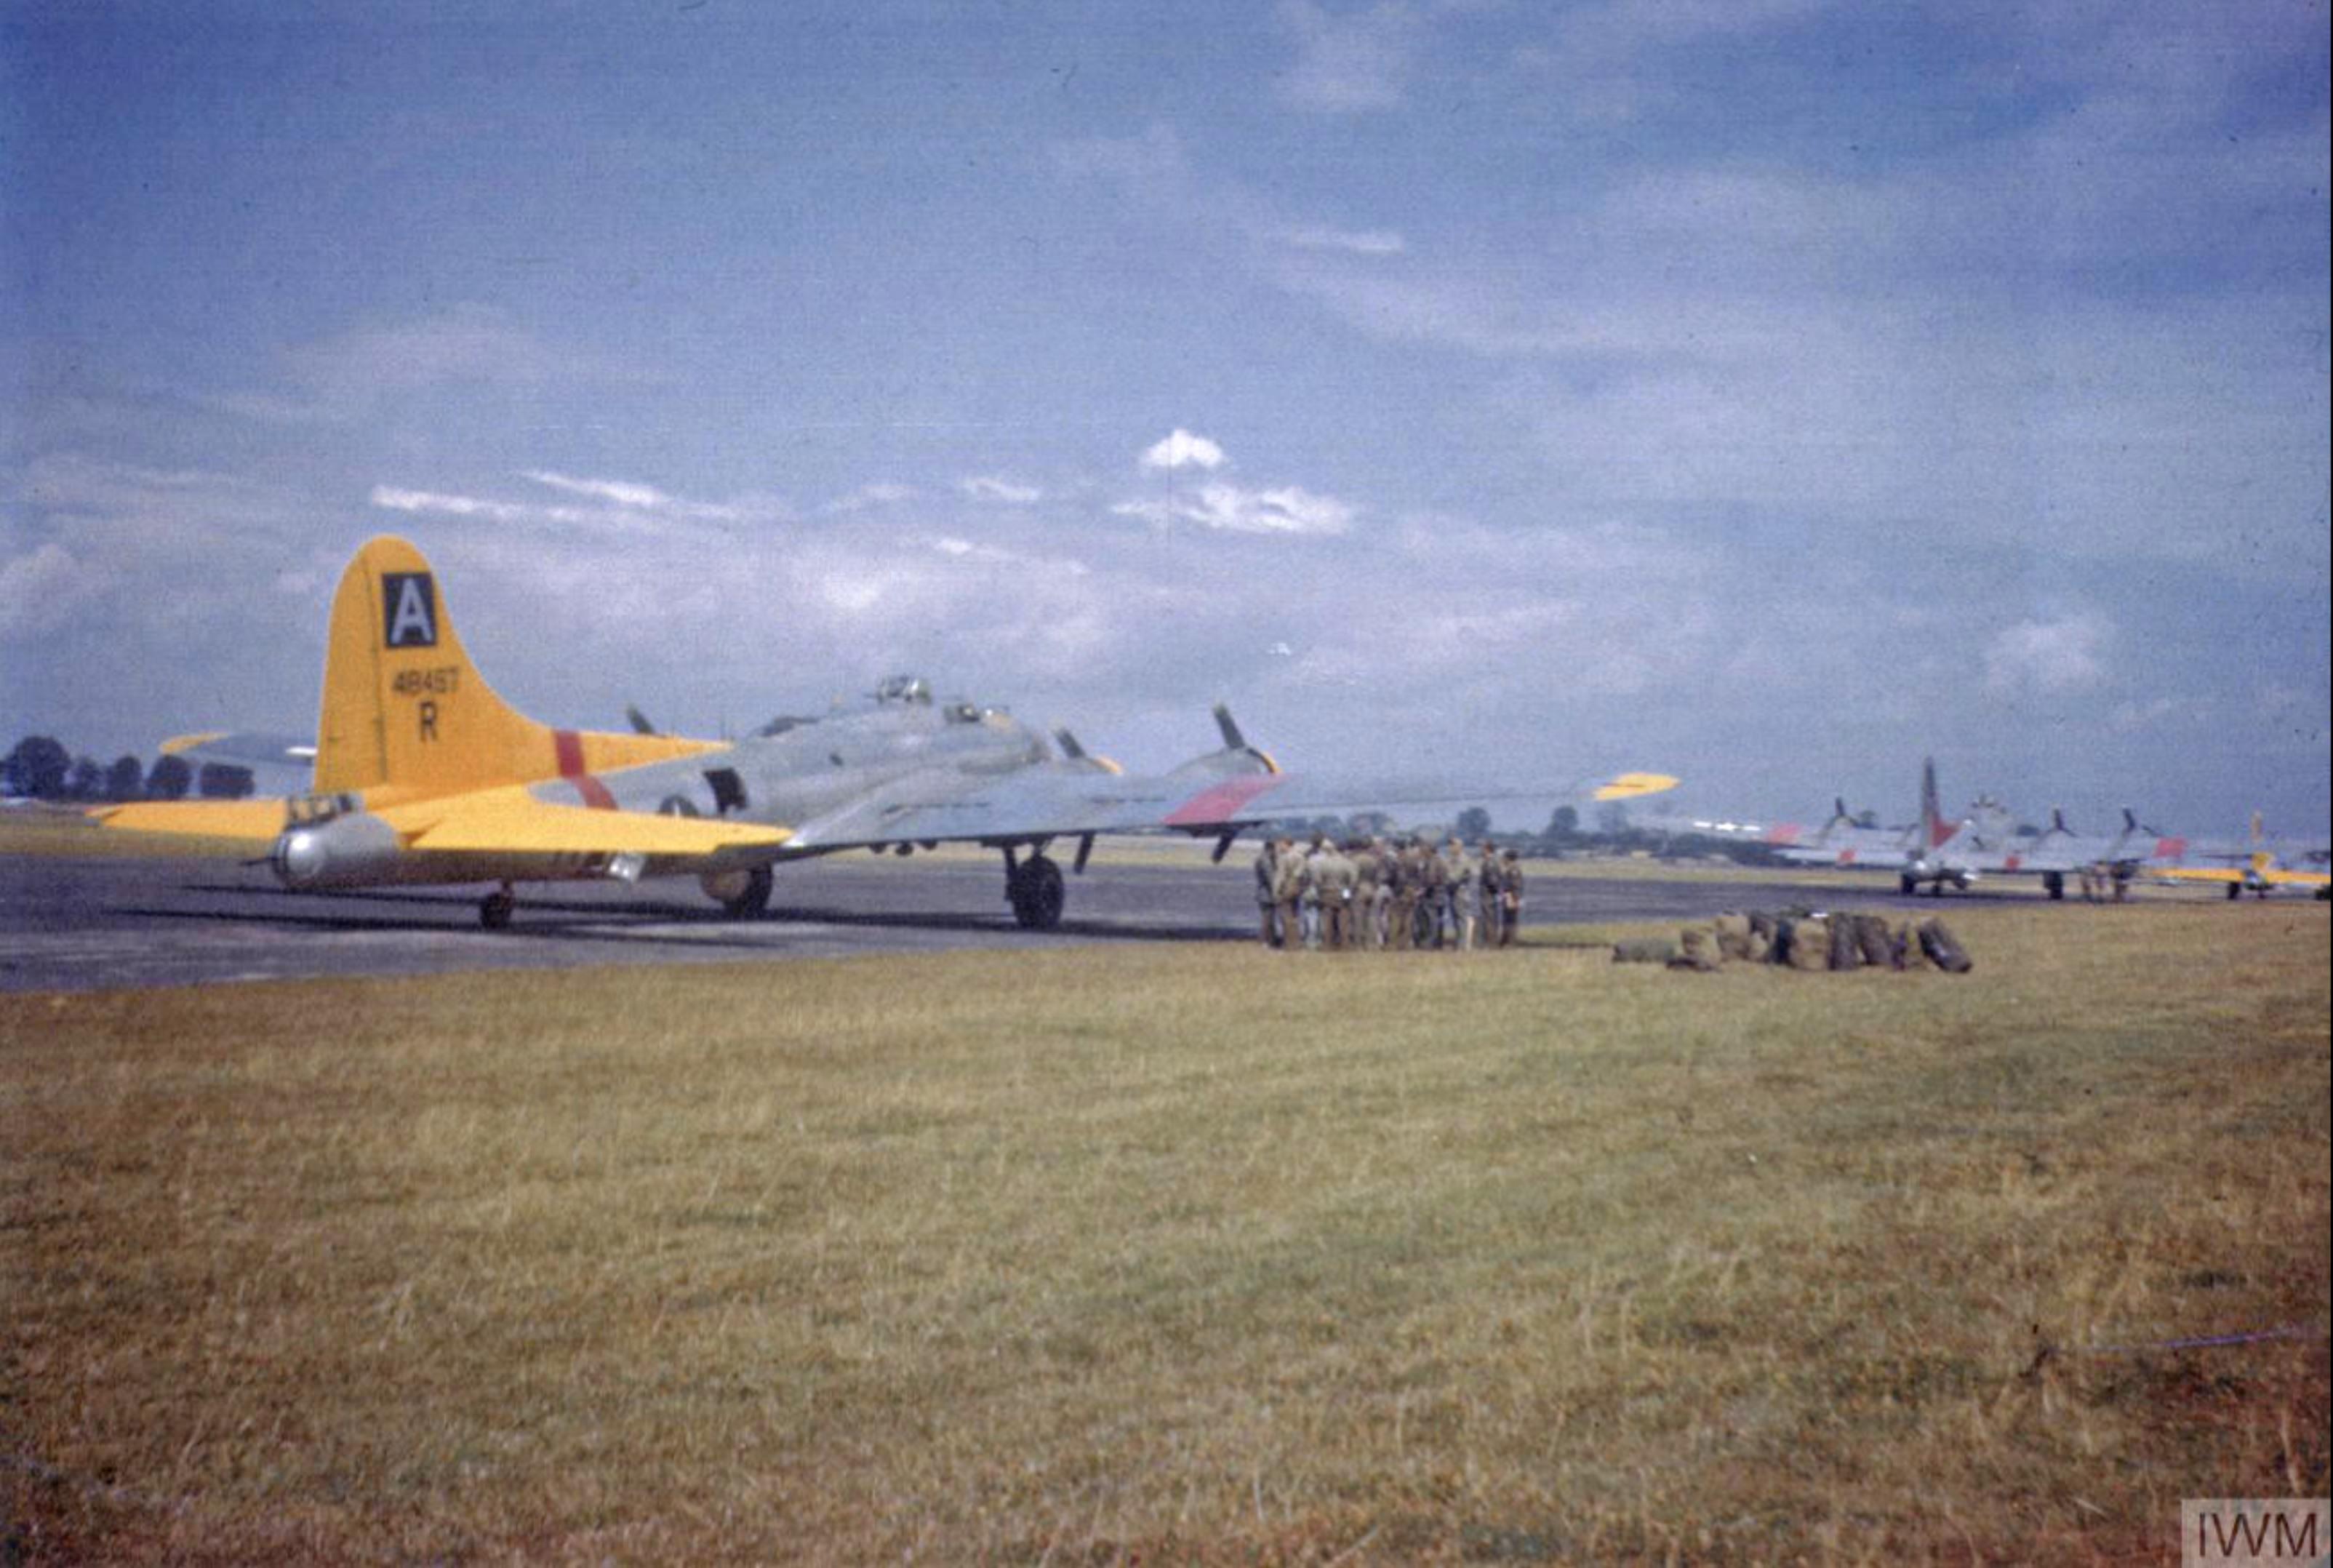 44 8457 B 17G Fortress 8AF 94BG332BS XMR lined up at Wormingford for relief mission to Kaufbeuren July 1945 FRE2453